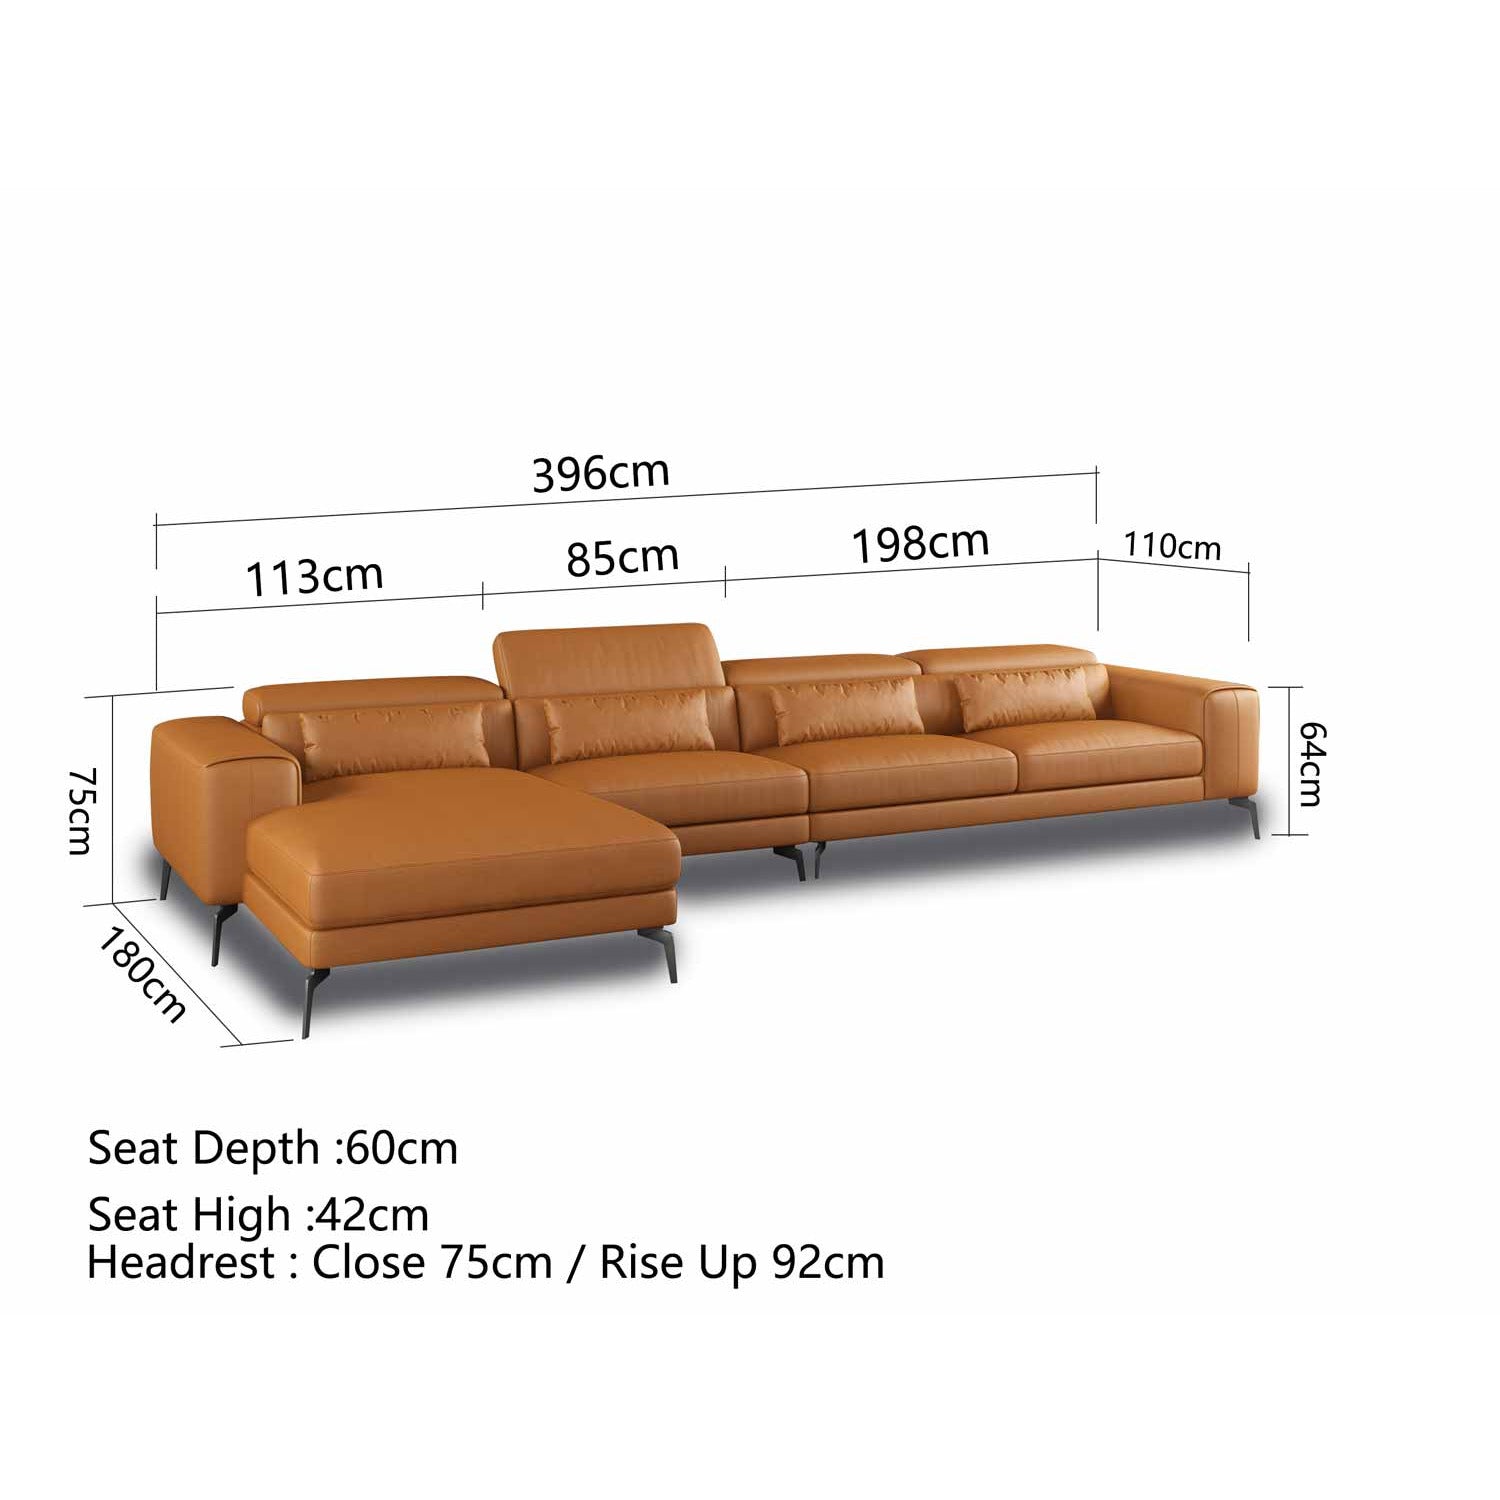 European Furniture - Cavour Right Hand Facing Sectional In Cognac - 12556R-3RHF - New Star Living